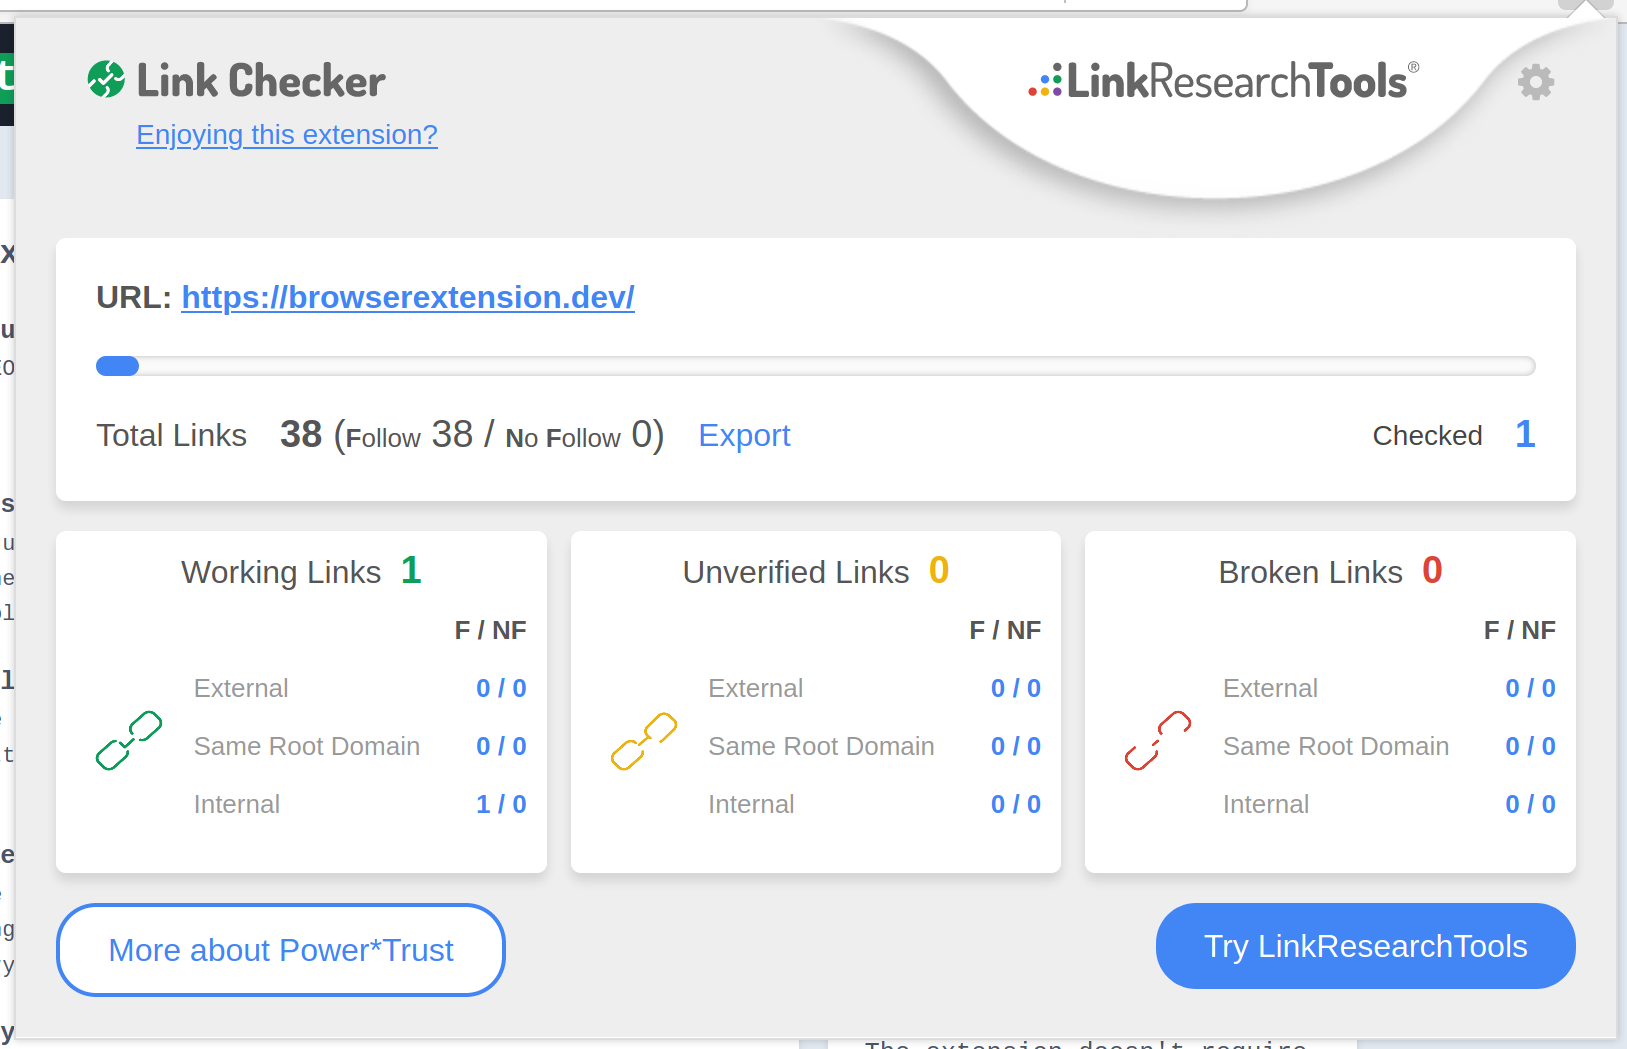 Demo of Link Checker Extension